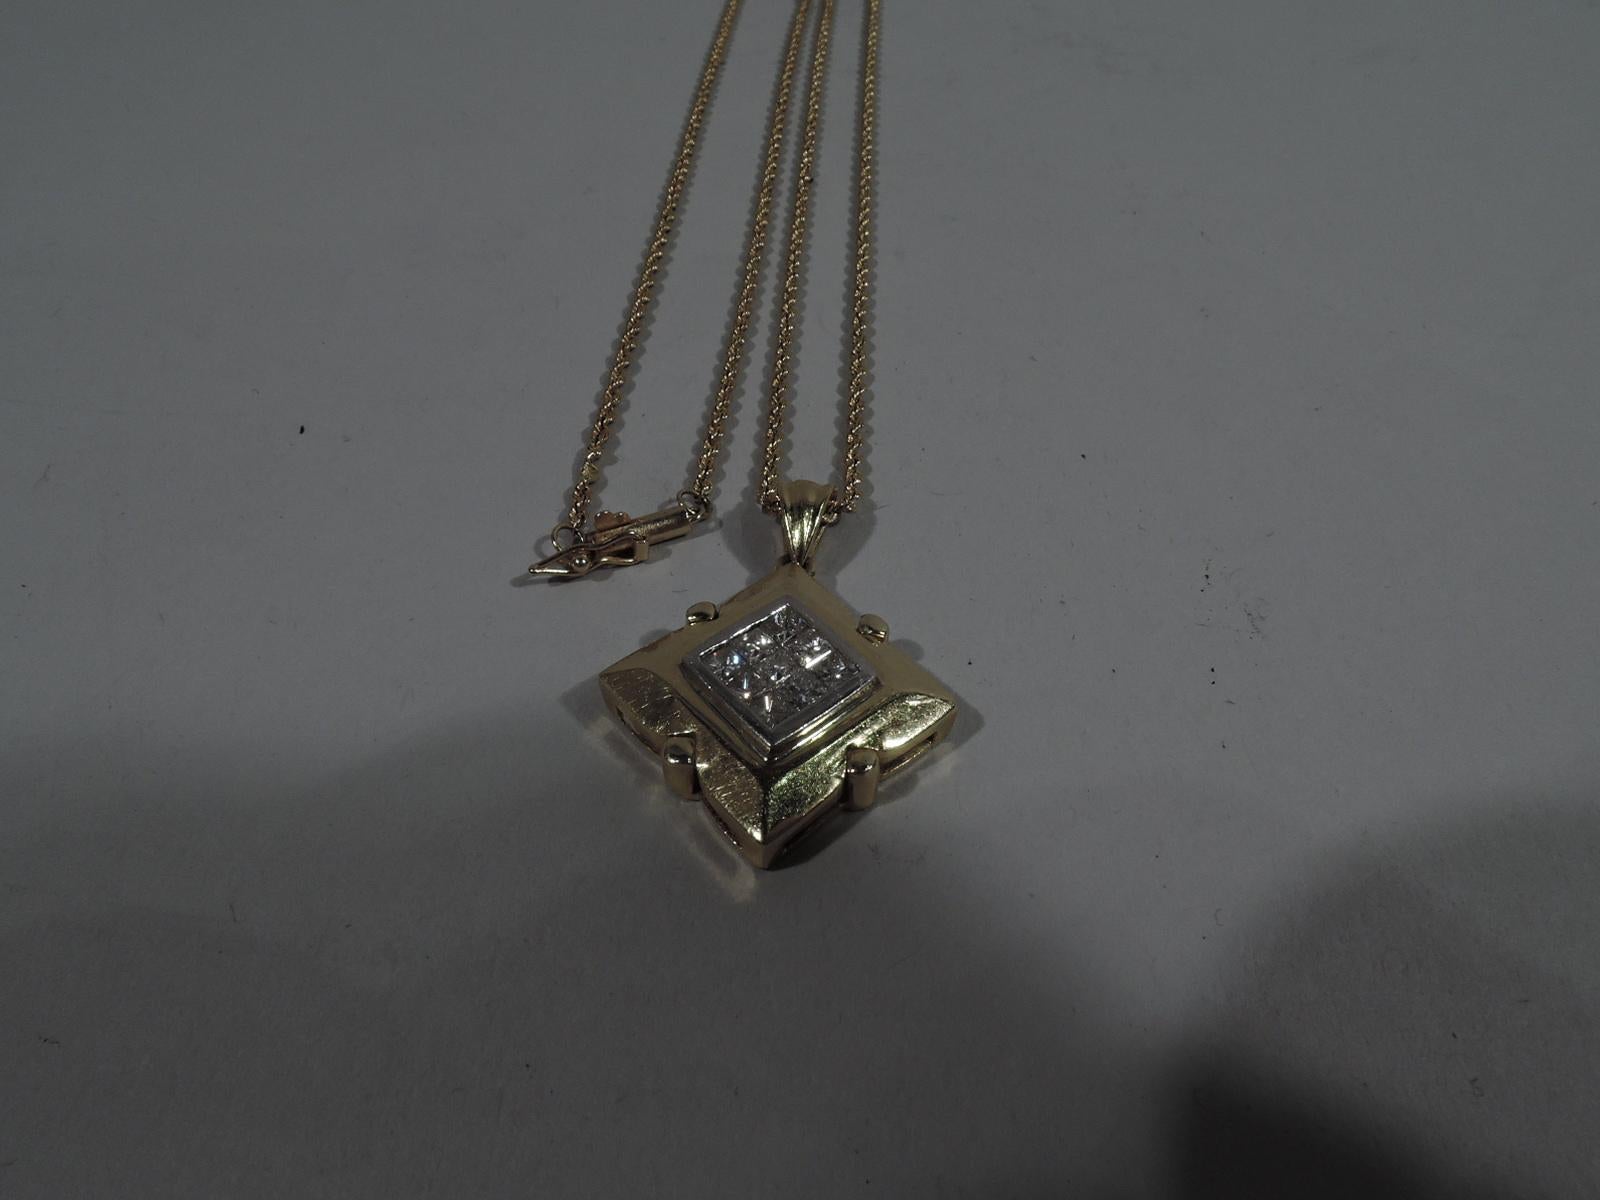 Lovely 18k gold and diamond pendant with 14k gold chain. Pendant is faceted lozenge with tubular pegs impressed on sides. Center inset with 9 square-cut diamonds (approx. total 1 carat). Back has pierced scrollwork. Rope chain. United States,